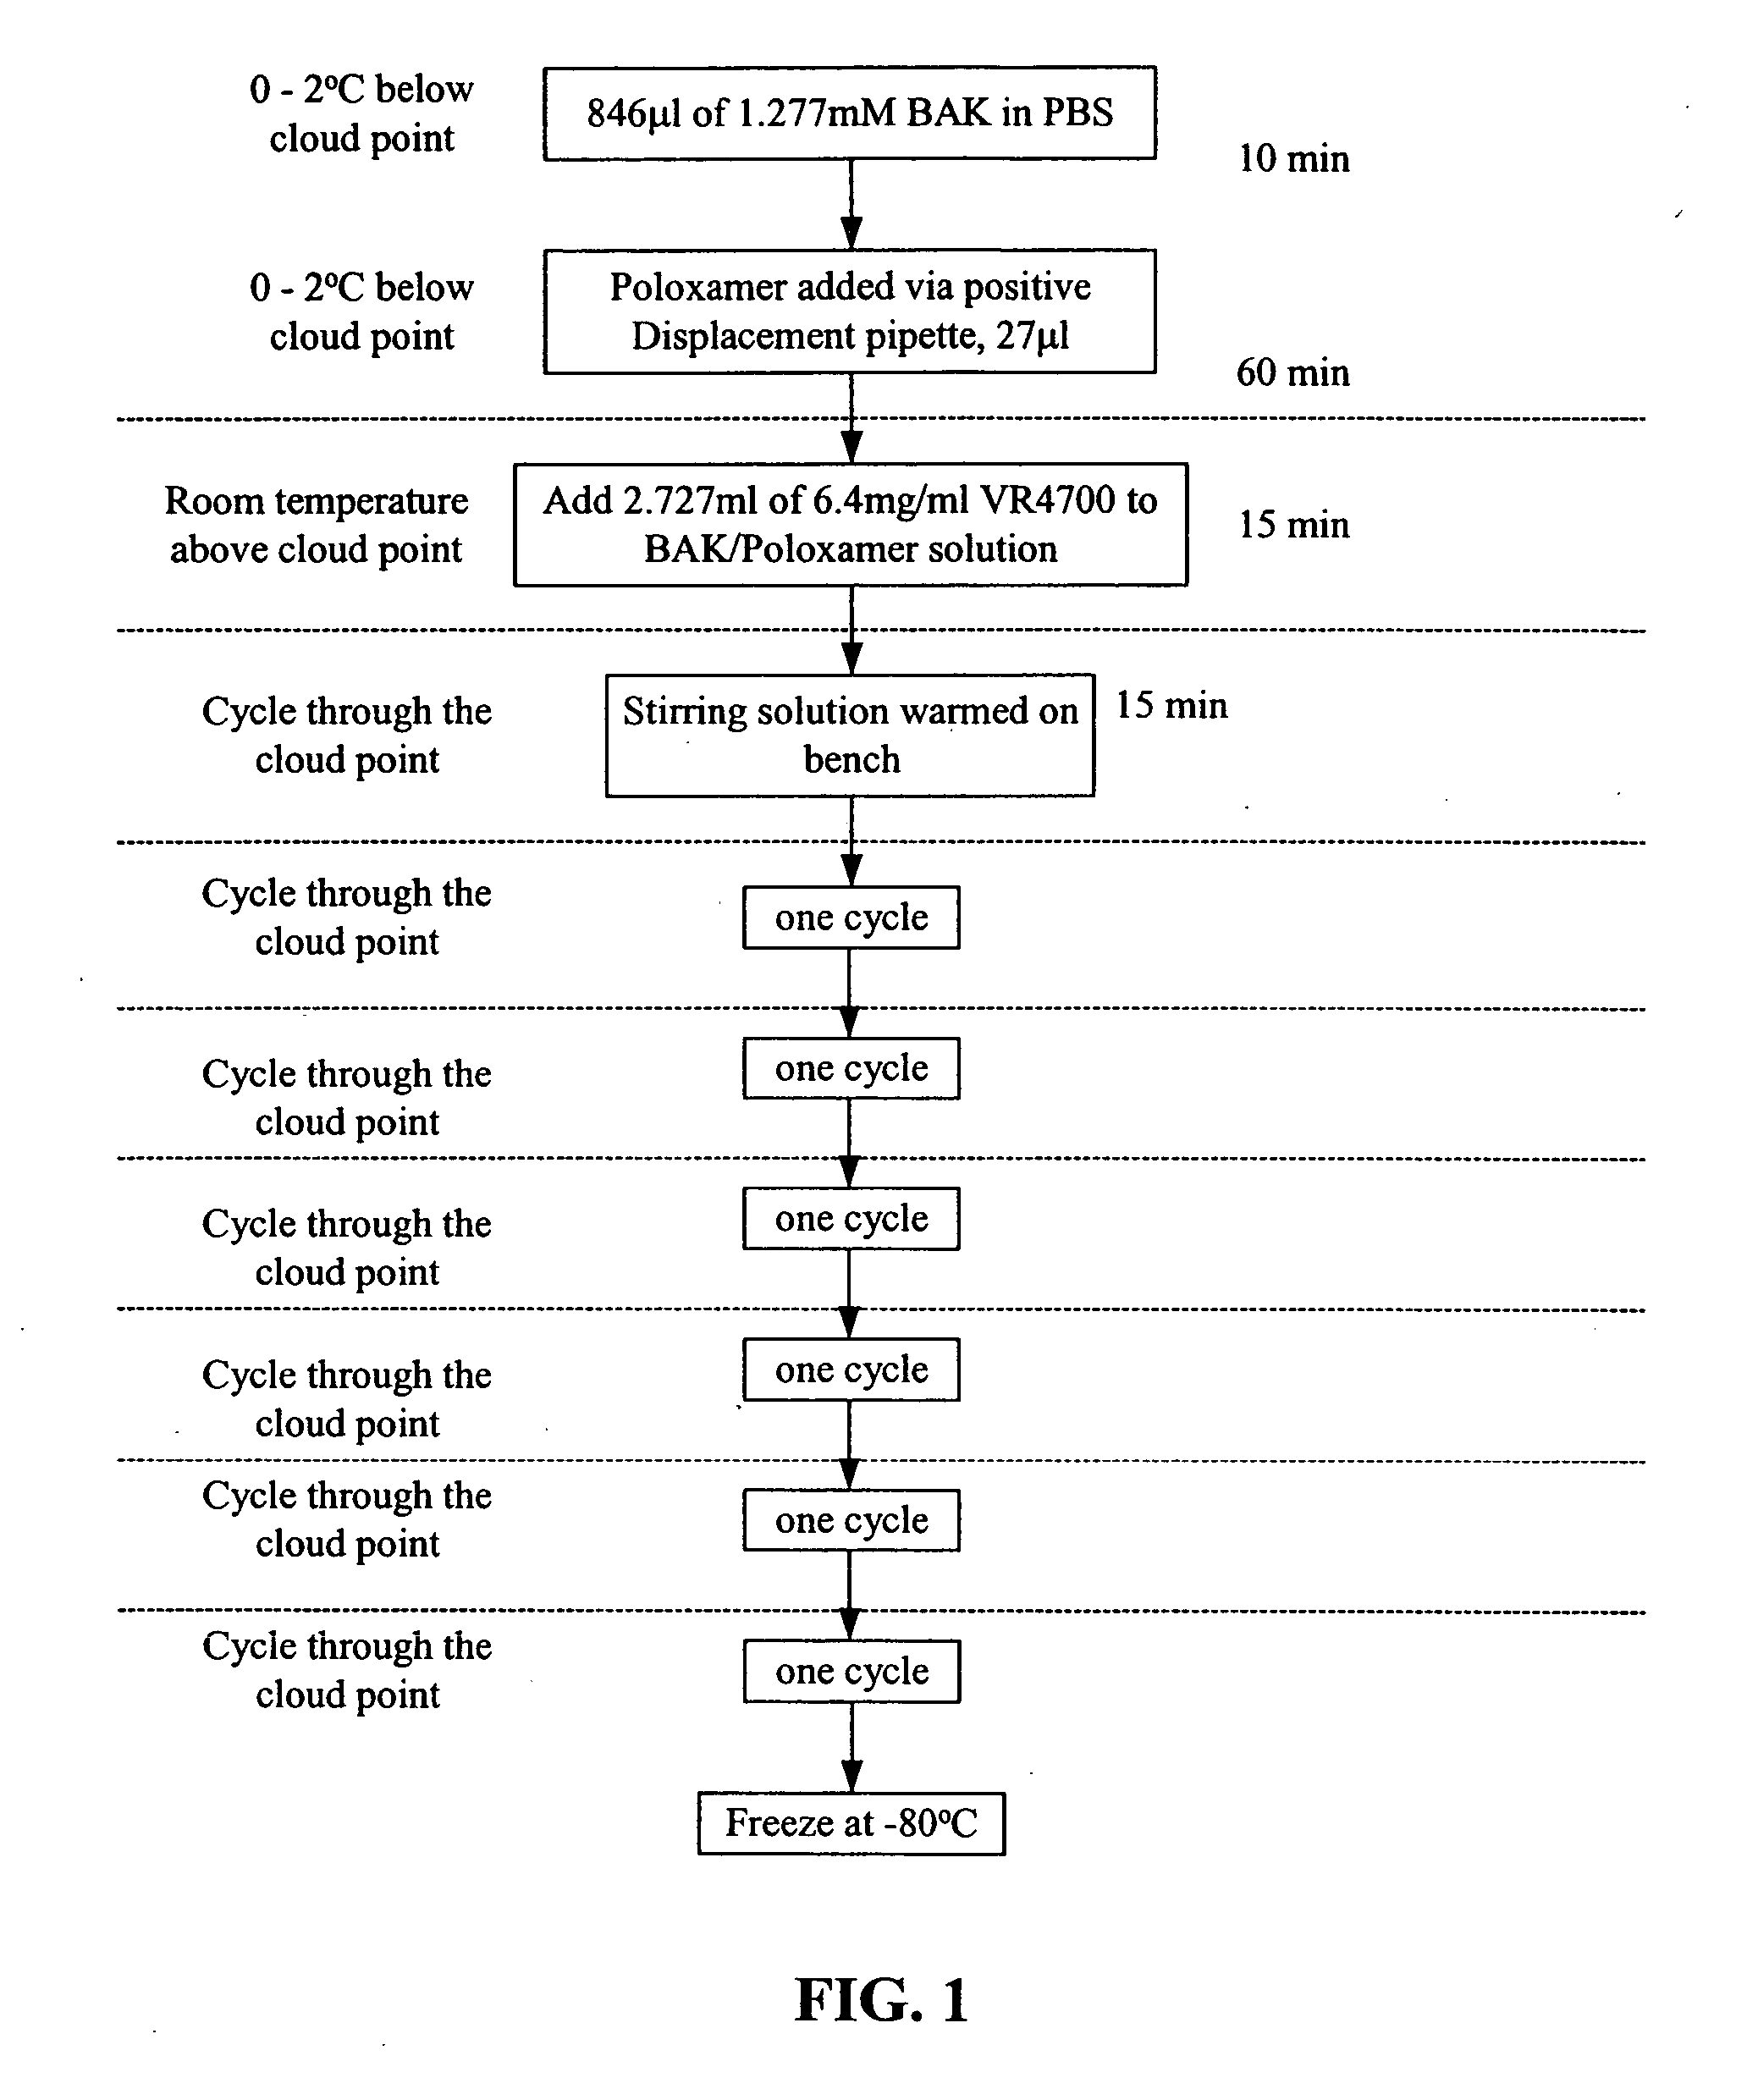 Severe acute respiratory syndrome DNA vaccine compositions and methods of use